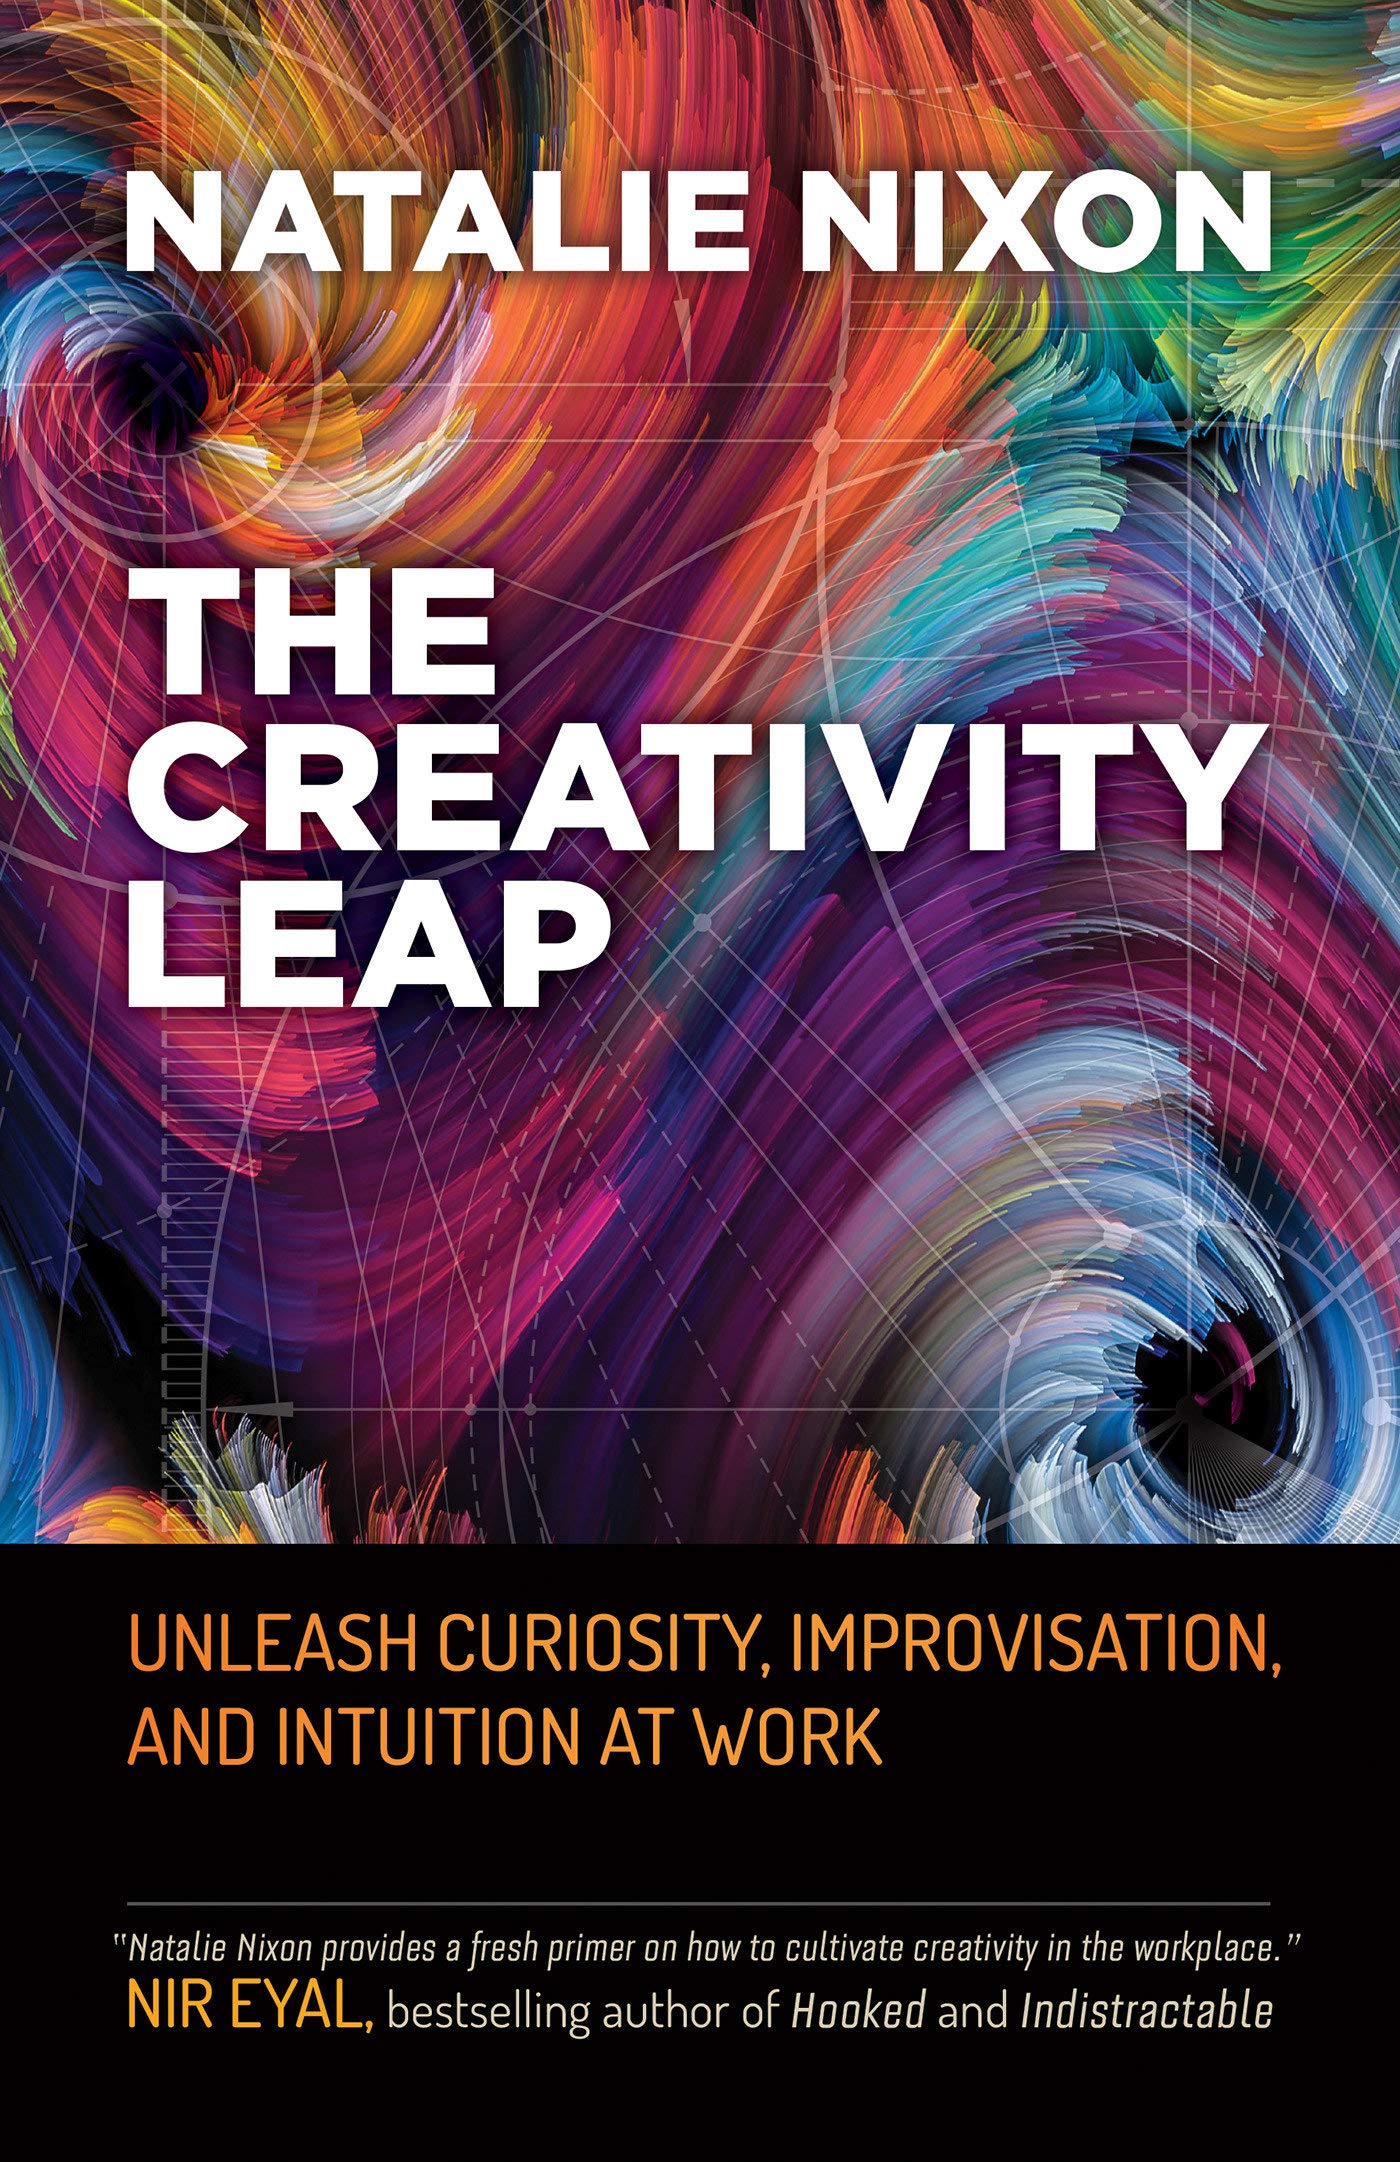 The Creativity Leap book cover